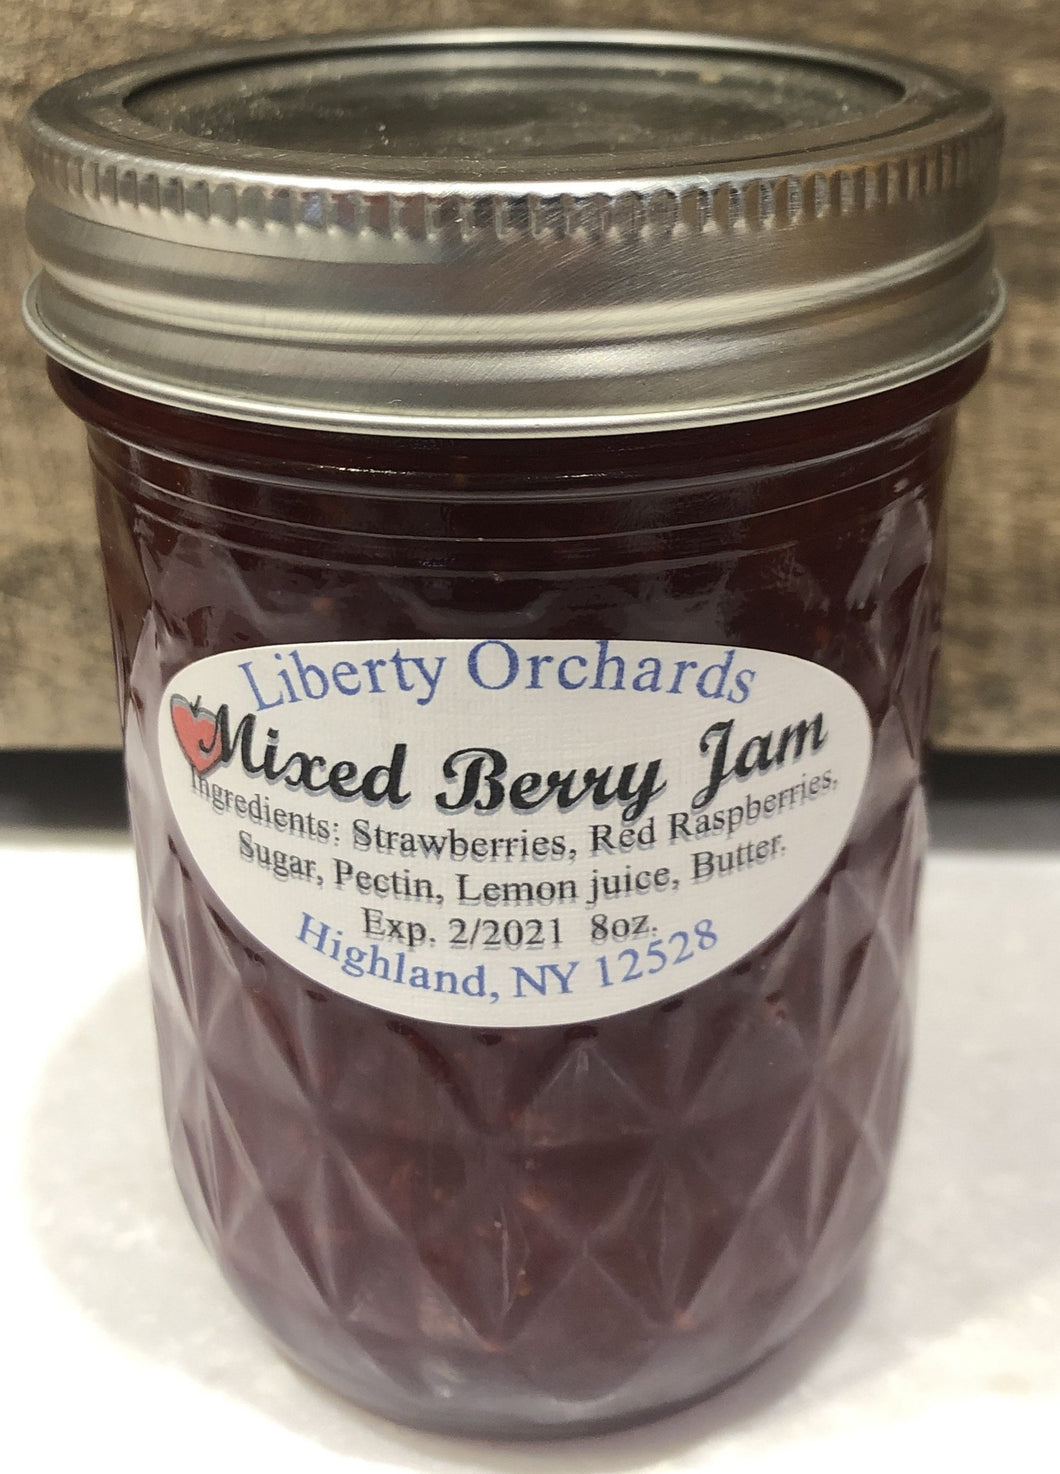 Made in the farmhouse kitchen at Liberty Orchards, classic jam at its best in an assortment of flavors made from fruits picked right at the farm.  Enjoy with buttered toast, as cake fillings, or paired with your favorite Hudson Valley cheese.  8 oz. glass jar canned and sealed.